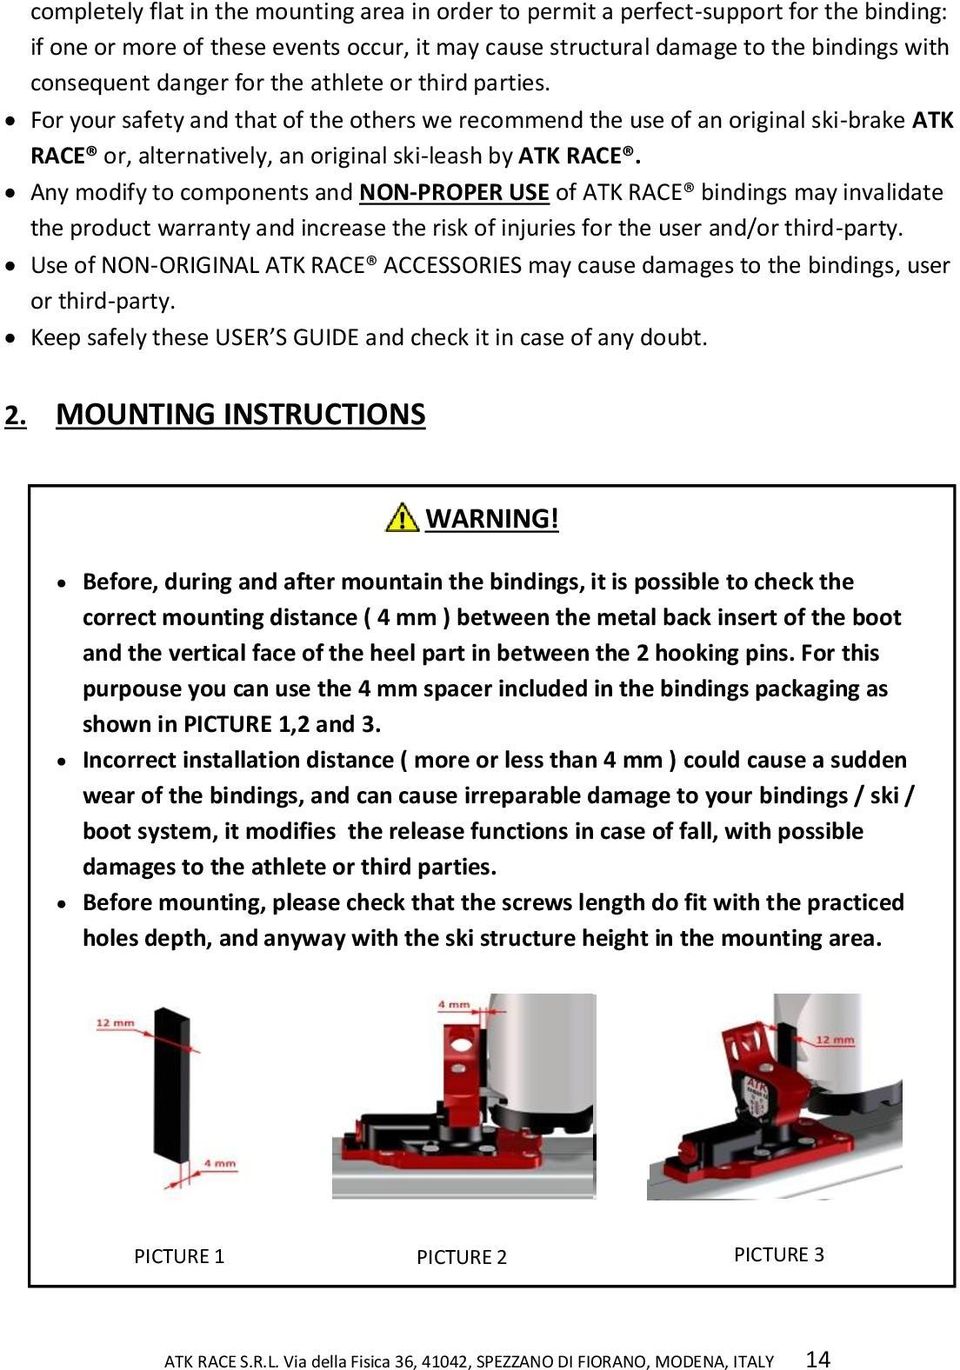 Any modify to components and NON-PROPER USE of ATK RACE bindings may invalidate the product warranty and increase the risk of injuries for the user and/or third-party.